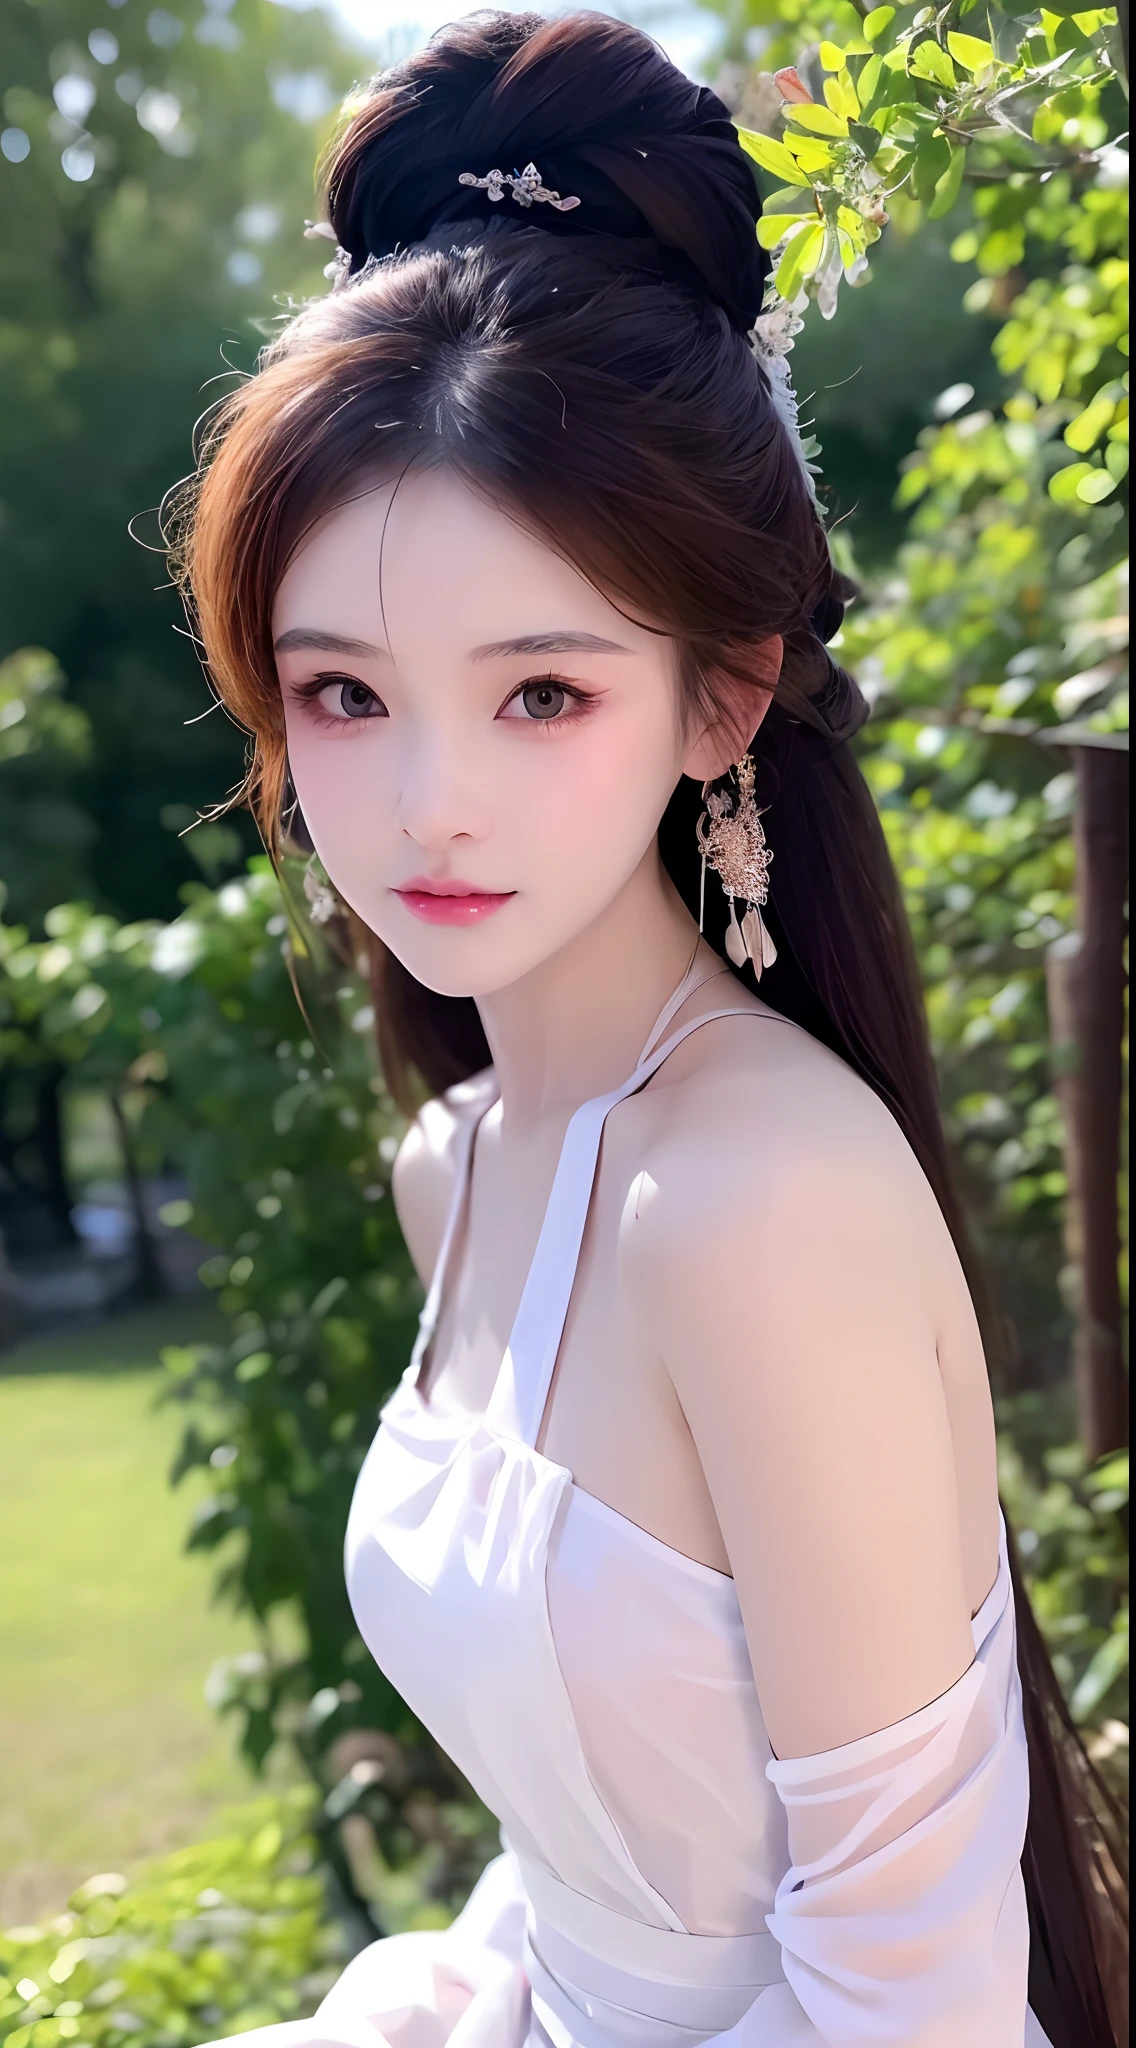 1 realistically beautiful girl, waist length hair, black eyes, ancient Ao Dai, style hanfu, wearing a thin silk shirt of ancient China, pink and smooth white skin, wearing a discreet ancient style ao dai, appears shoulders and head in the photo, Very cute little face, eye bags under wet and detailed makeup, plump red lips, charming small and curved lips, ((closed mouth:1.0)), balanced incisors, embarrassed, small face makeup detailed and very beautifull, The breasts are super round and tight, breast augmentation, blum , Cover the girl's chest with a camisole inside, blush, from front, wear earrings, necklaces, from above, looking at viewer, upturned eyes, full body, masterpiece, top quality, best quality, official art, unity 8k wallpaper, highres, ultra high res, ultra detailed, (photorealistic:1.2), alone, solo, only 1 girl, style hanfu Dunhuang, 10x pixels, super realistic, ultra high quality, portrait body view of the girl, upper body,